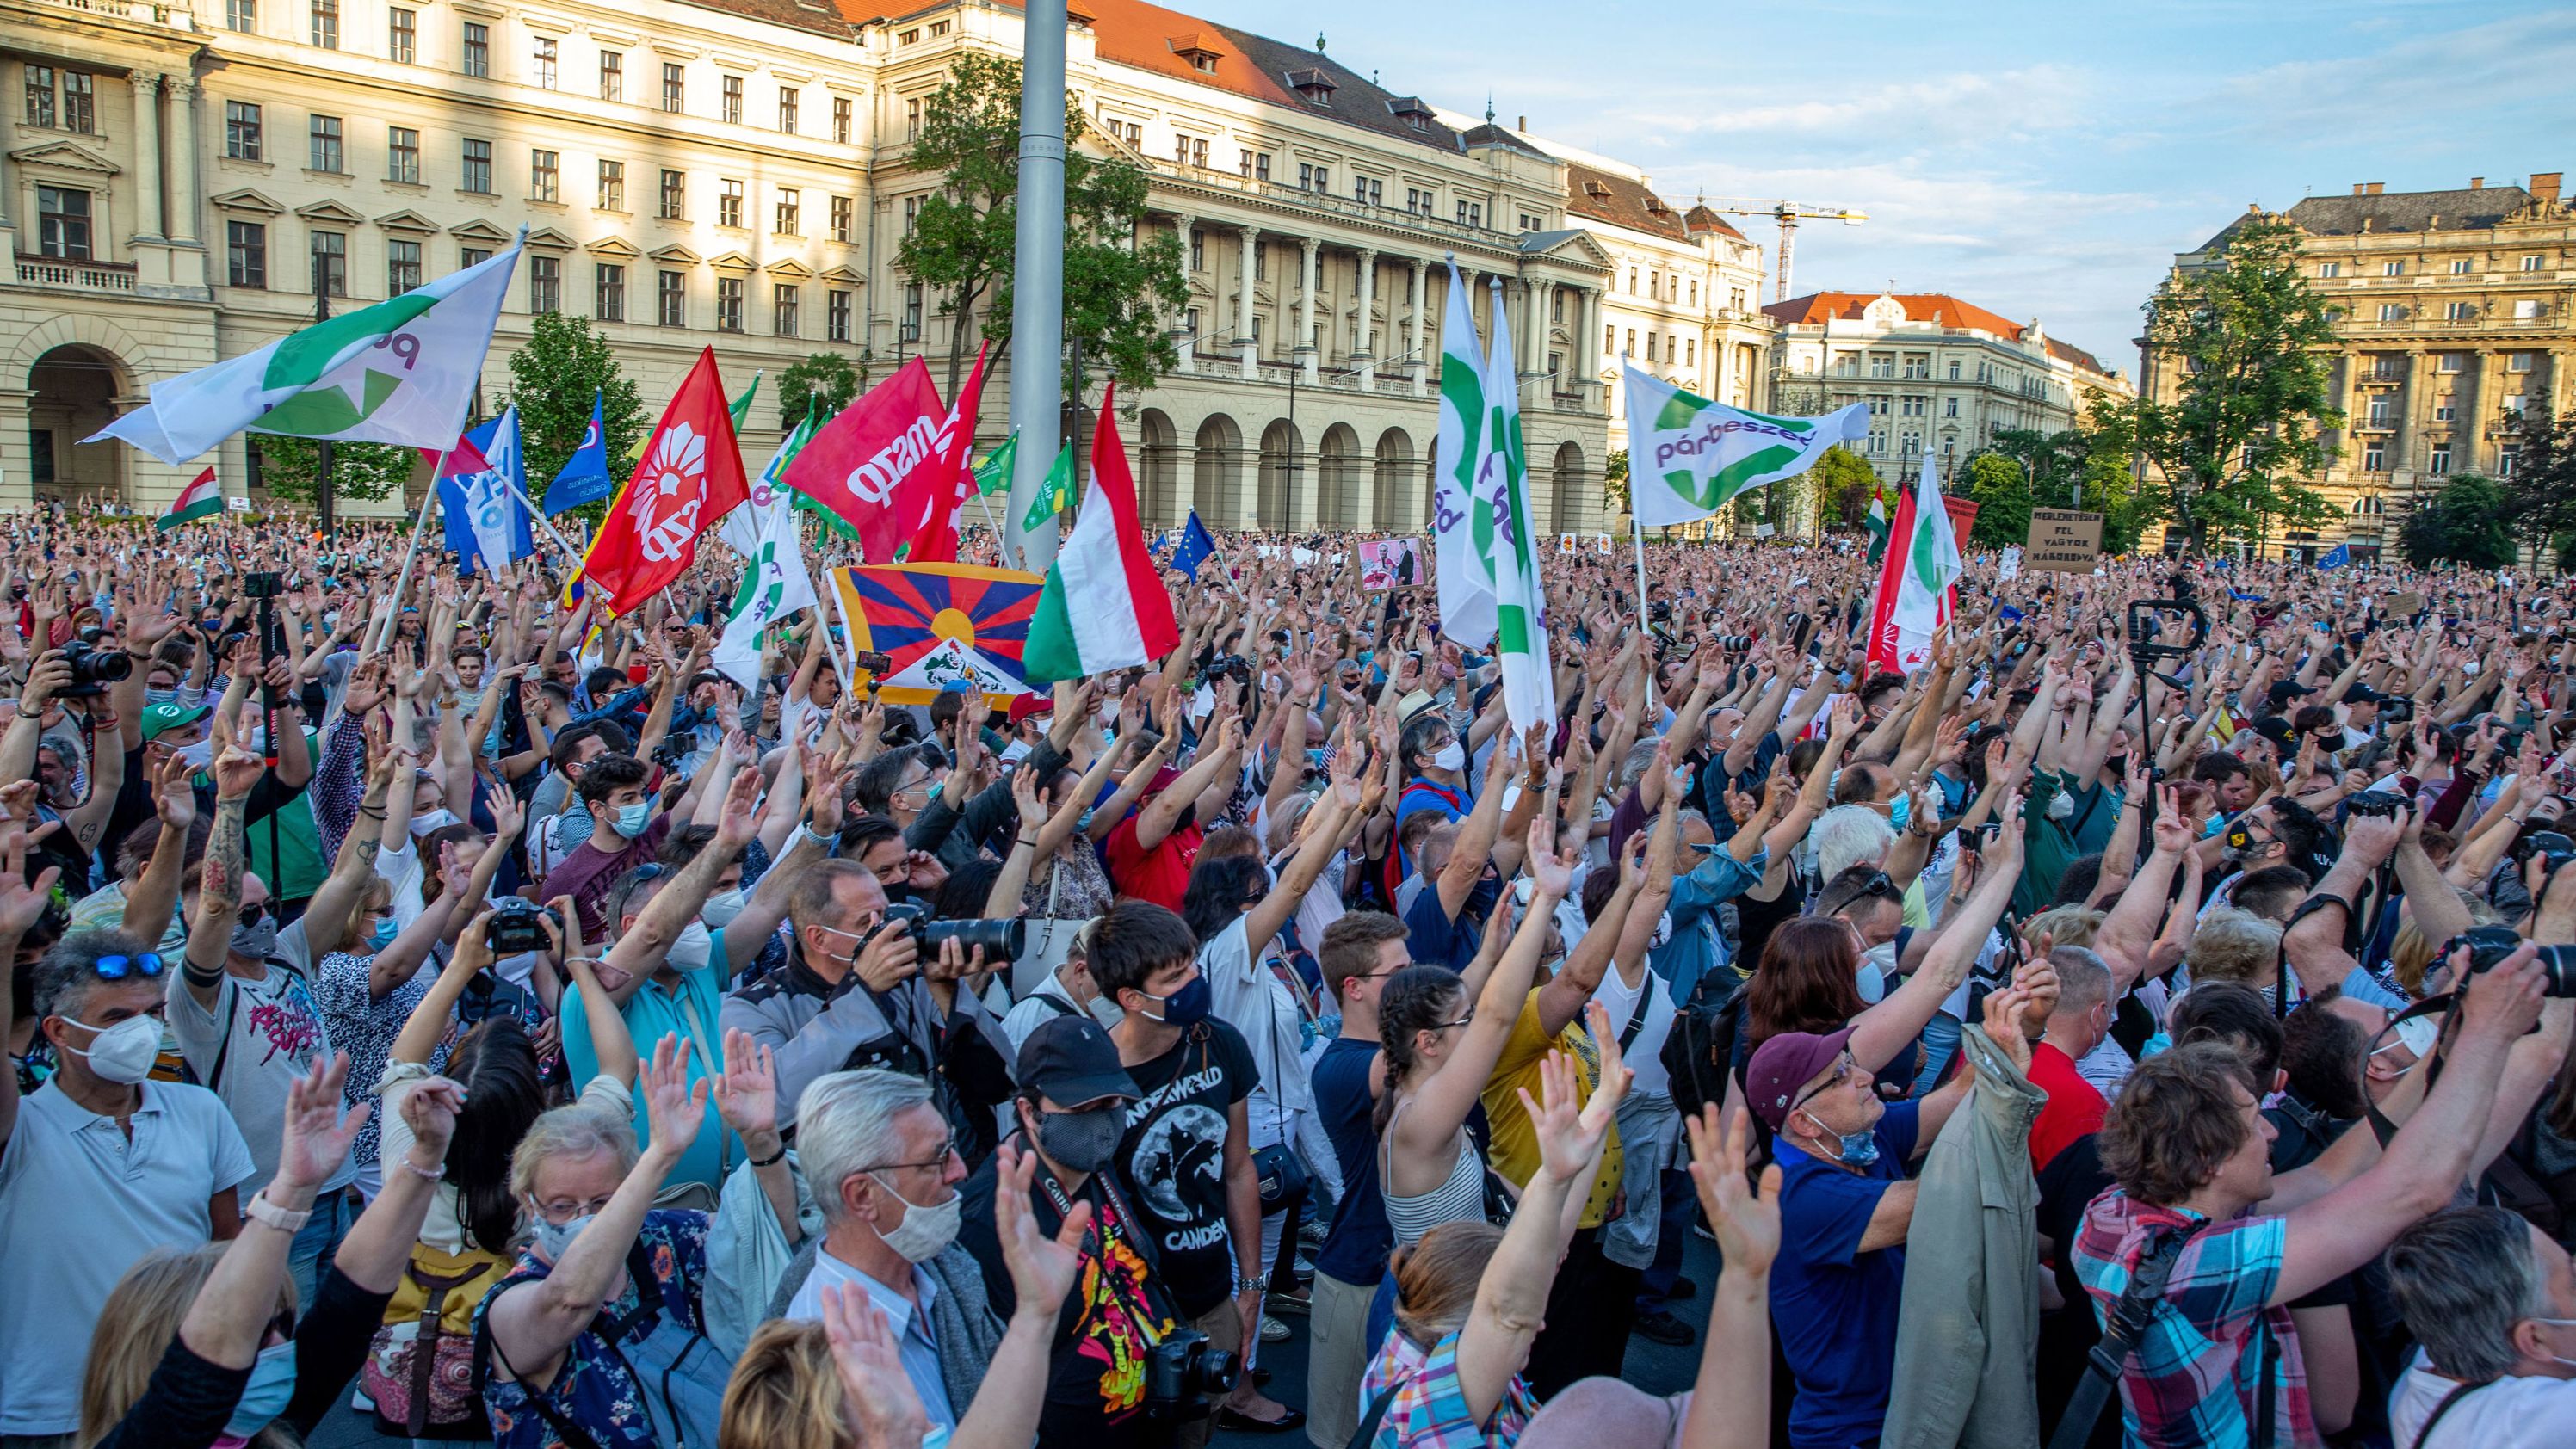 Demonstrators protest against the planned construction of a Chinese university campus in Budapest, on June 5, 2021.